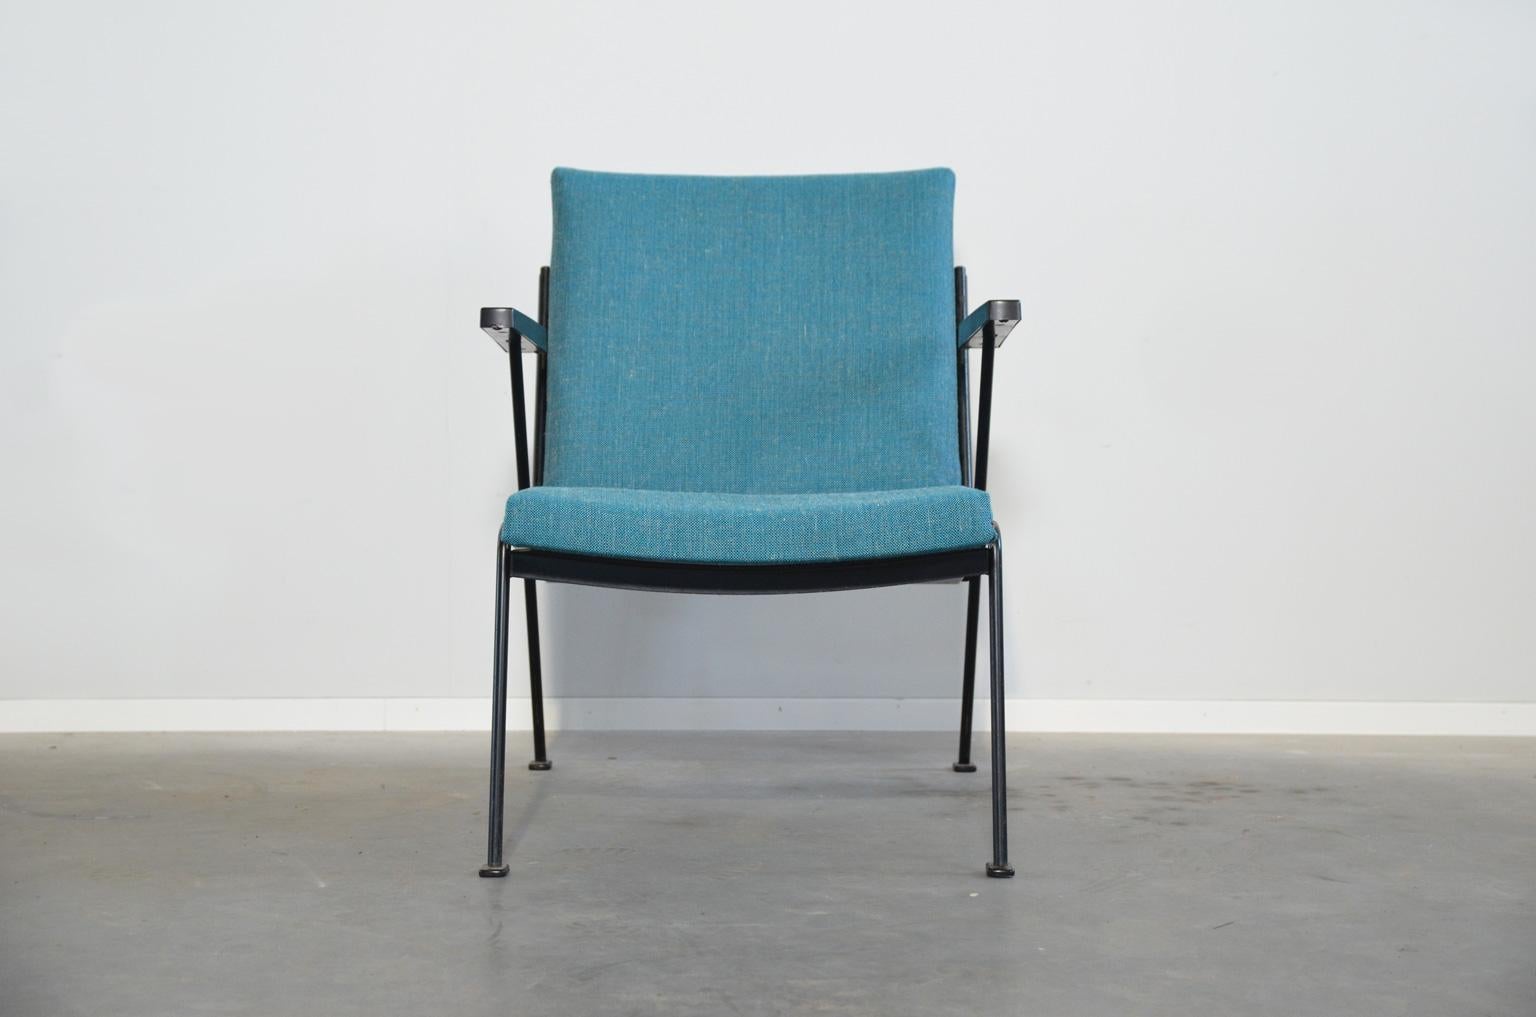 Mid-20th Century Wim Rietveld Oase Chair model 1401 for Dutch firm Gispen 